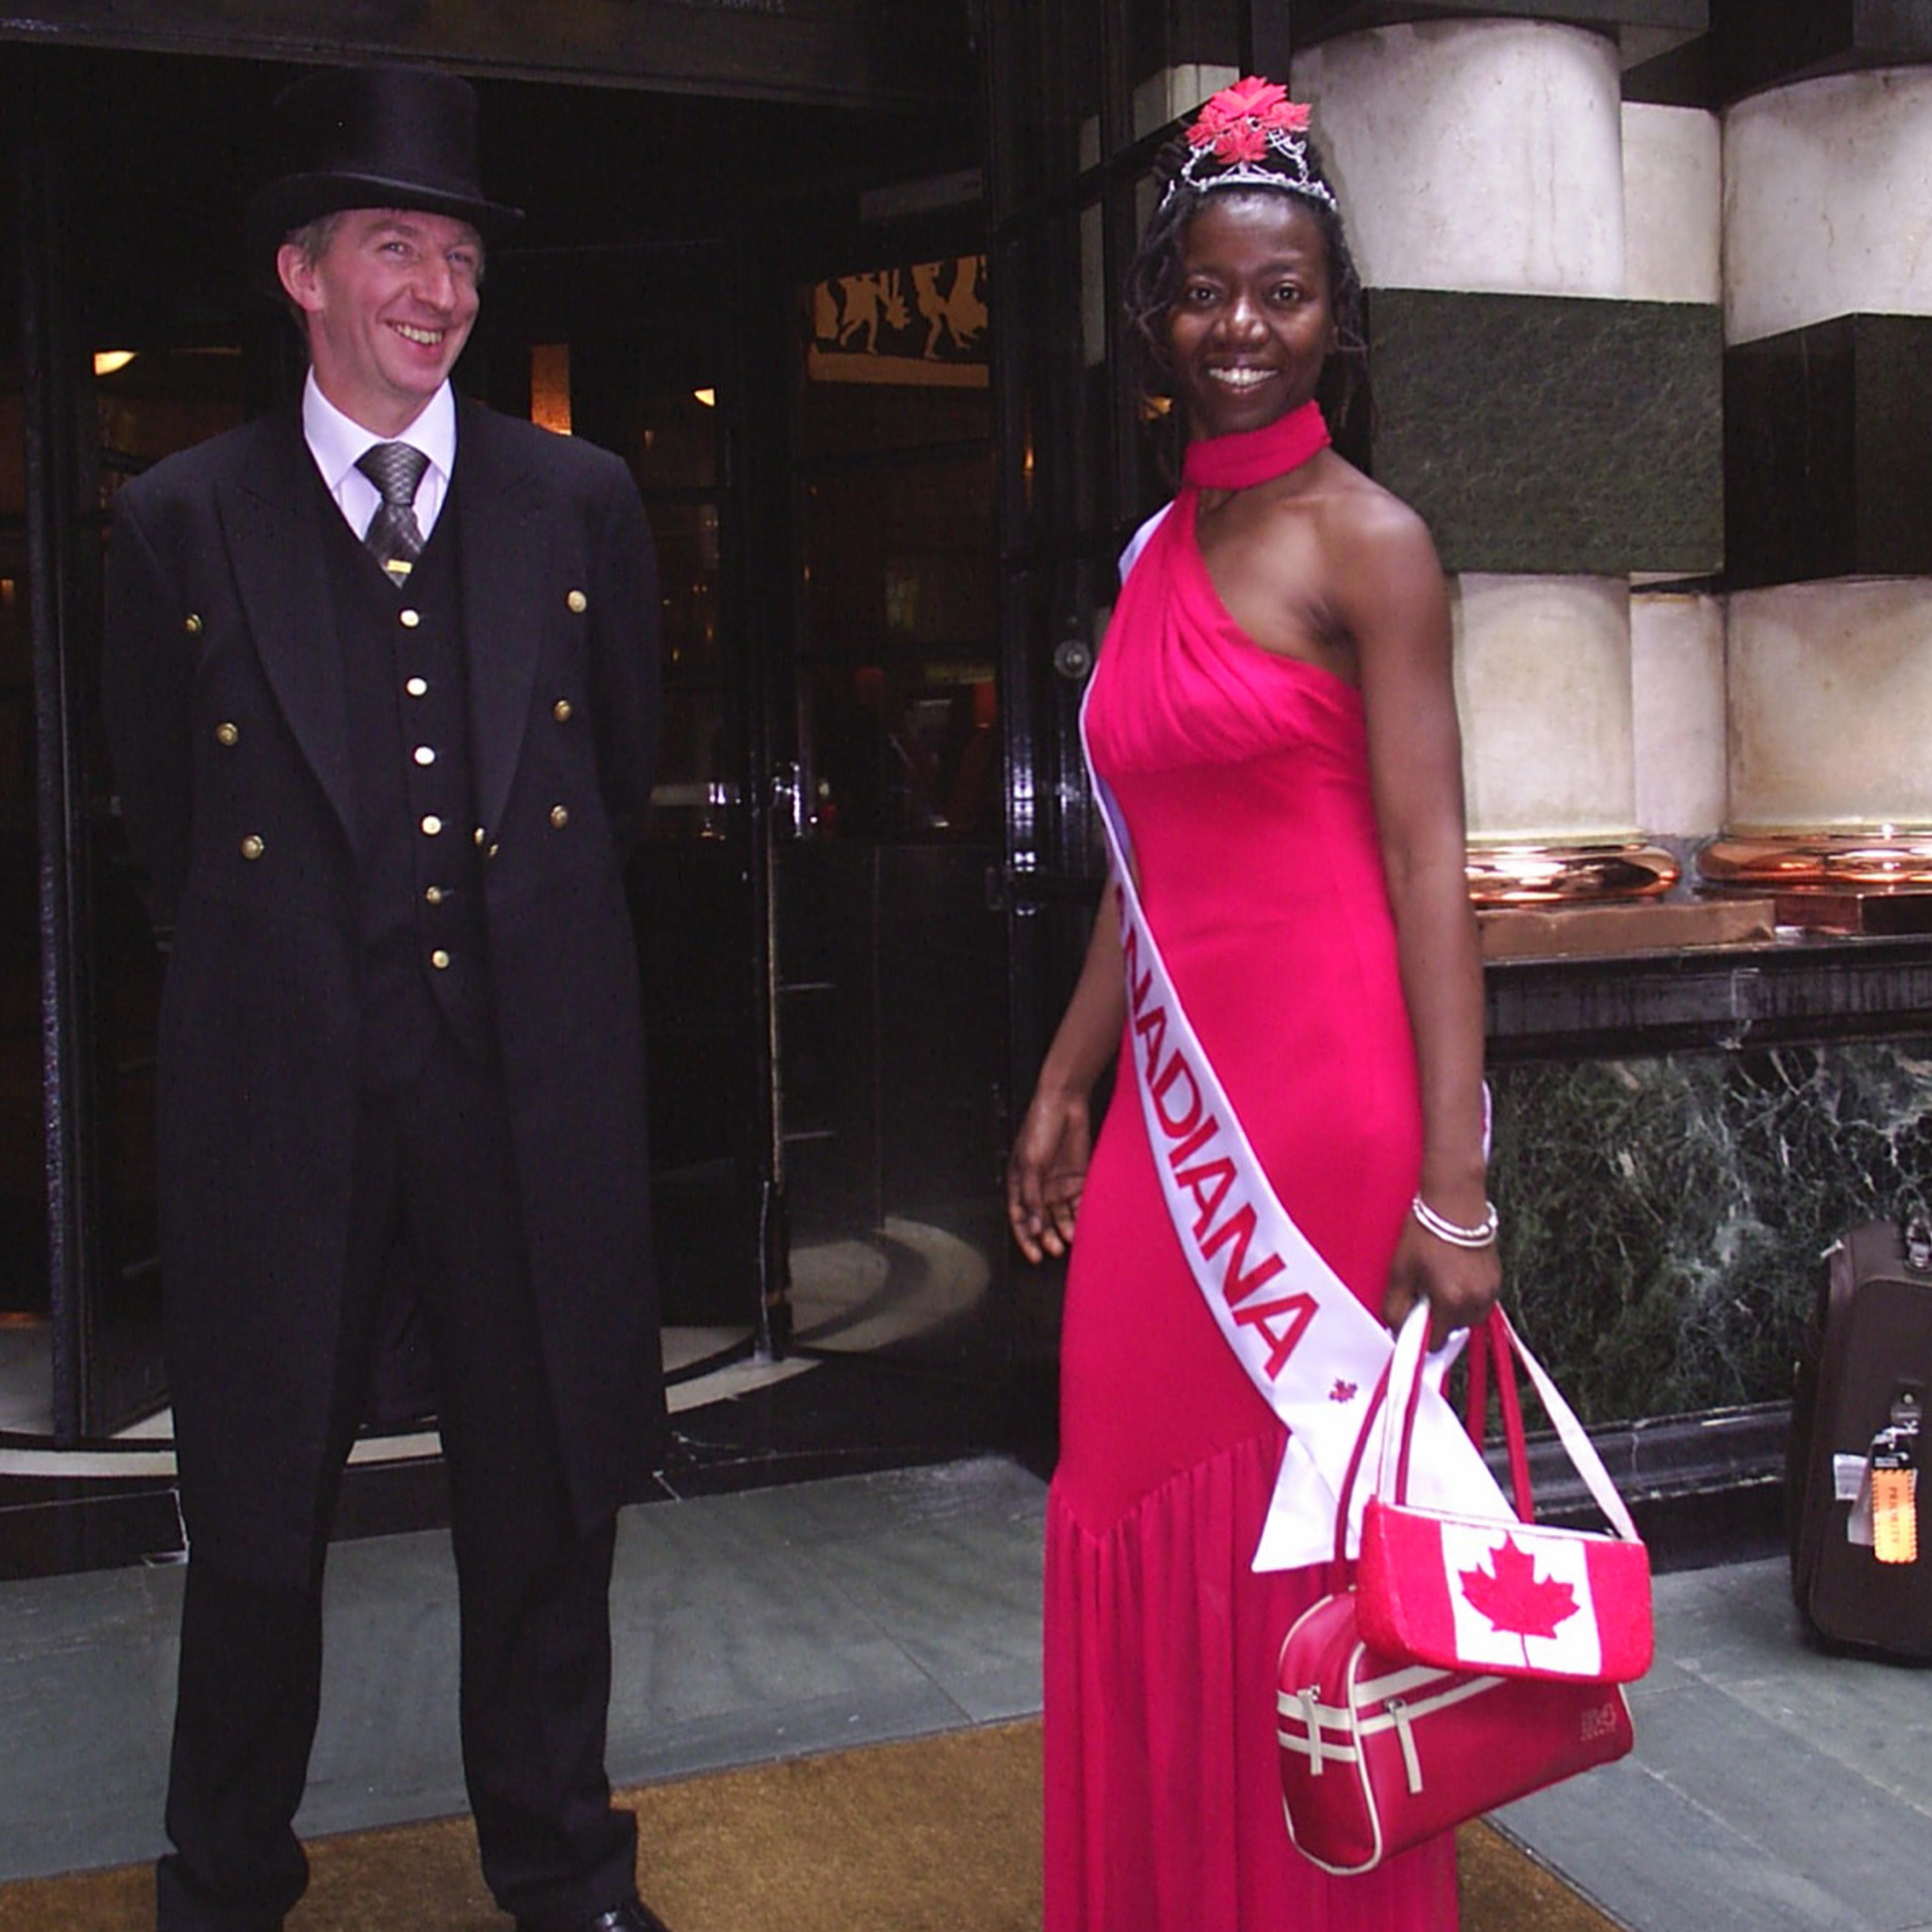 The artist Camille Turner dressed in a long red gown with a Miss Canadiana sash poses with a door man wearing a suit.